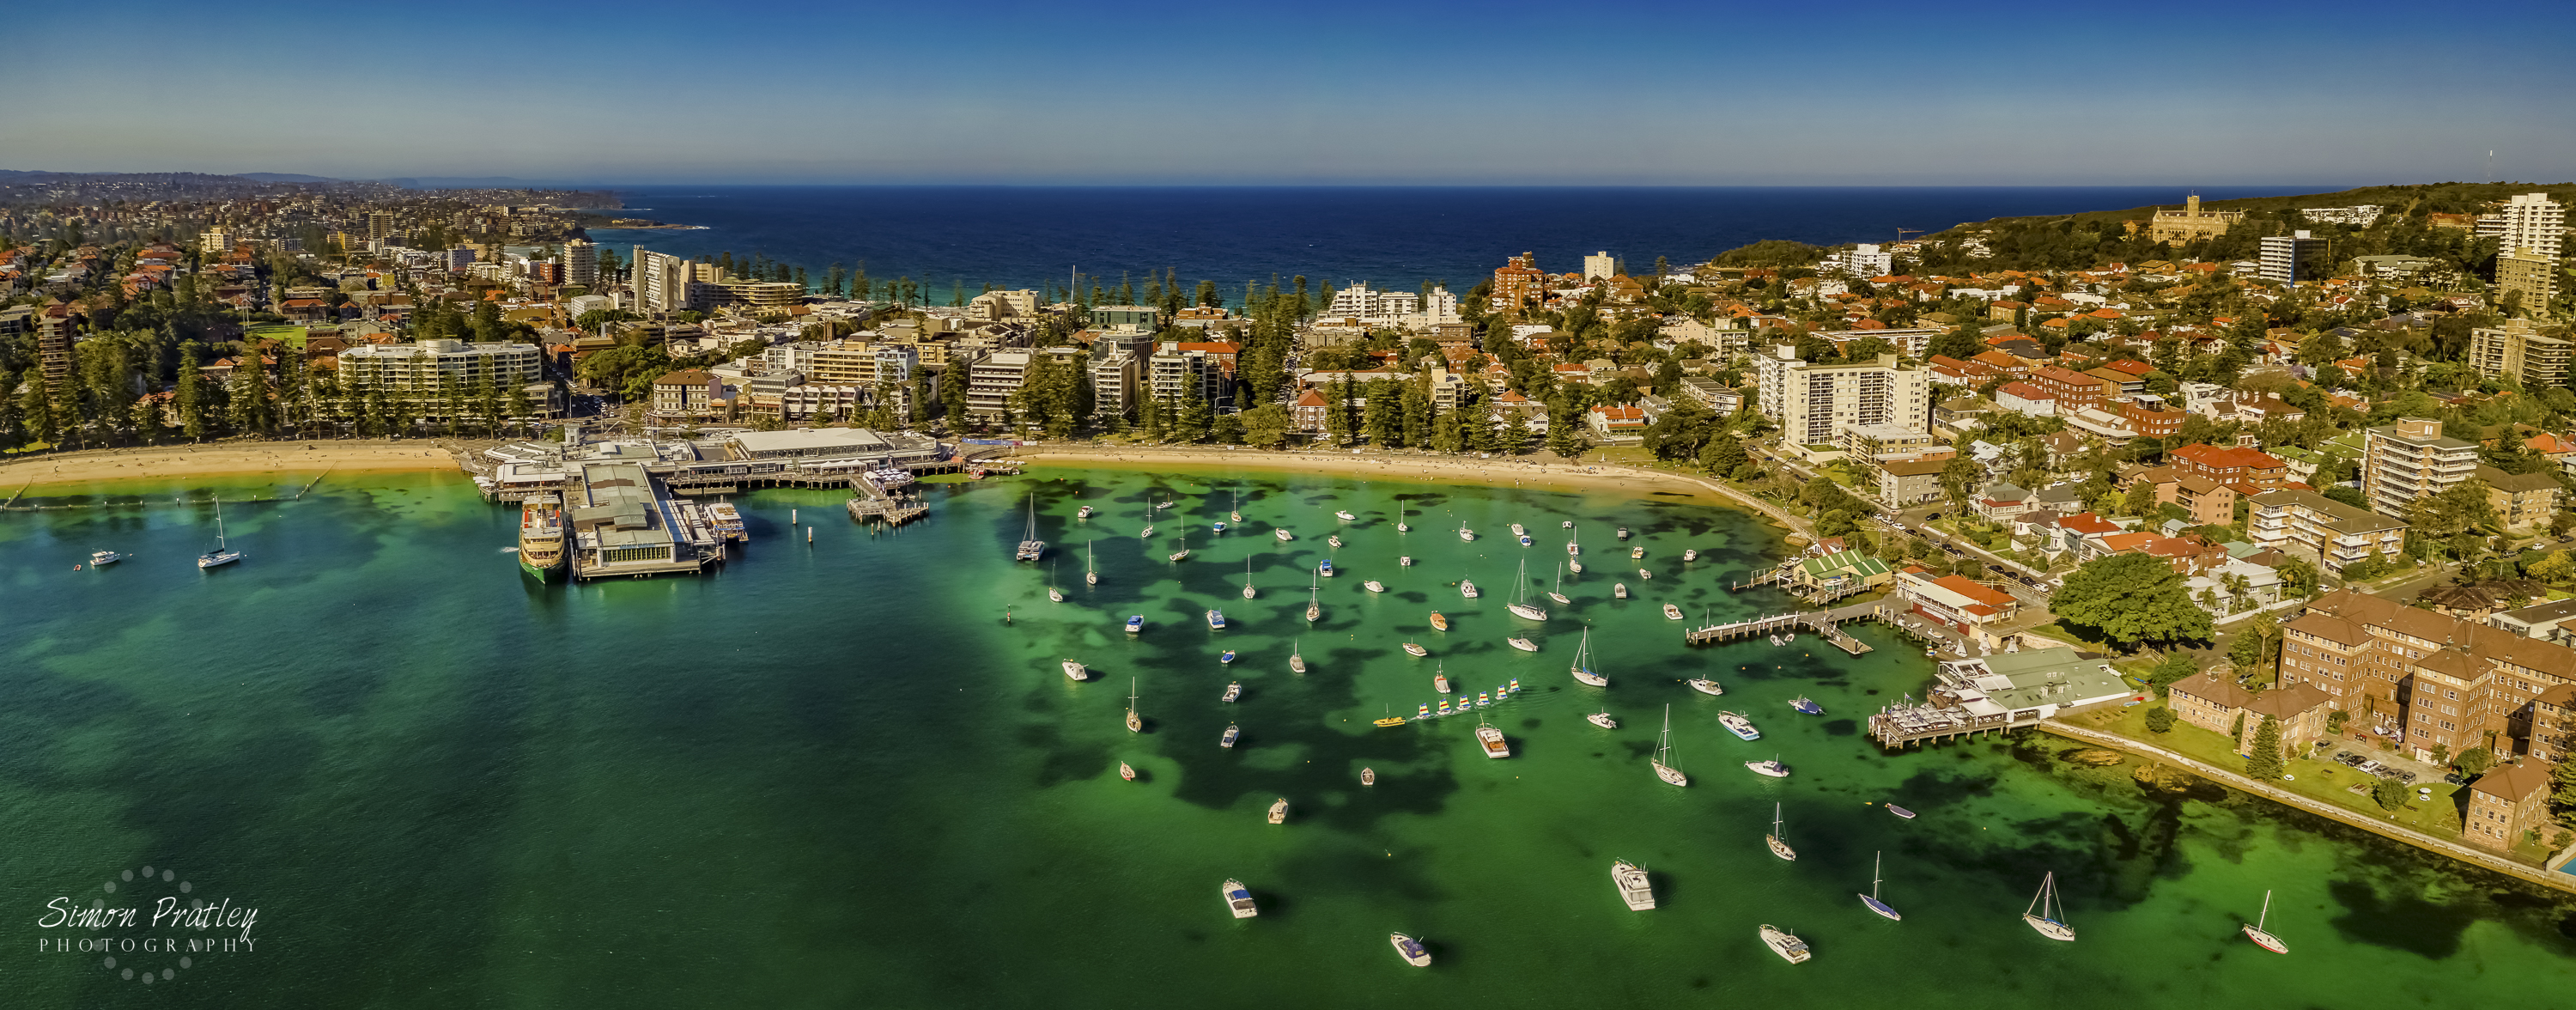 The Beauty of Manly Cove Panoramic